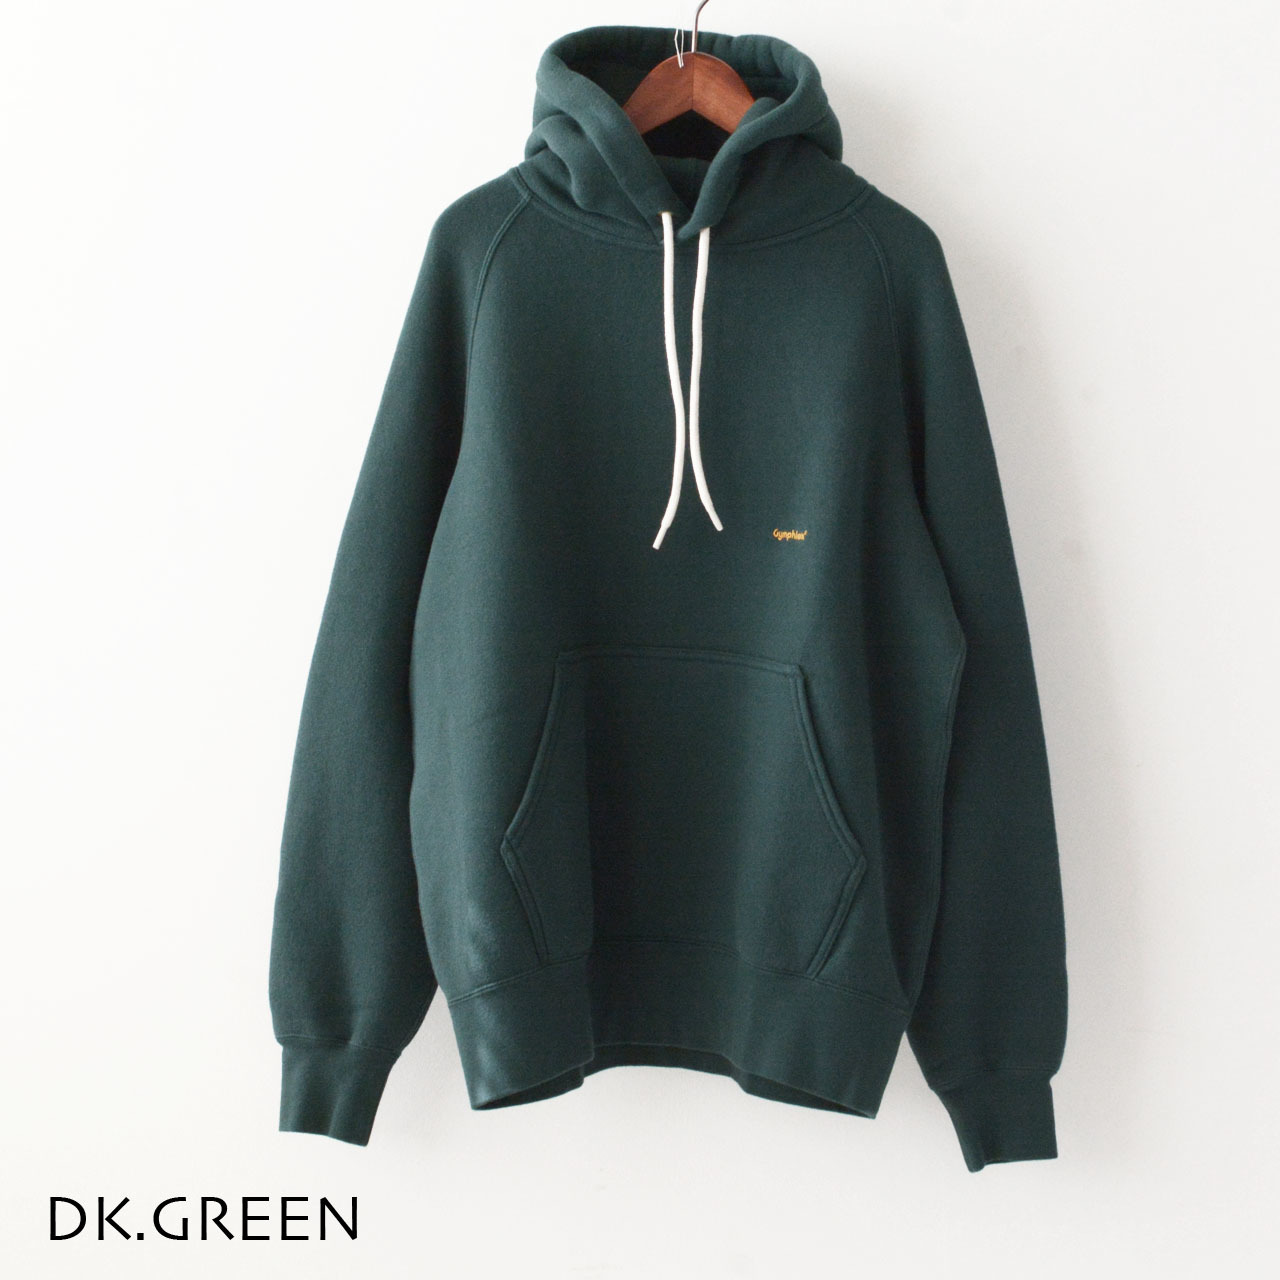 Gymphlex [ジムフレックス] SWING SLEEVE PULLOVER HOODIE [GY-C0002 ARB]_f0051306_13480037.jpg